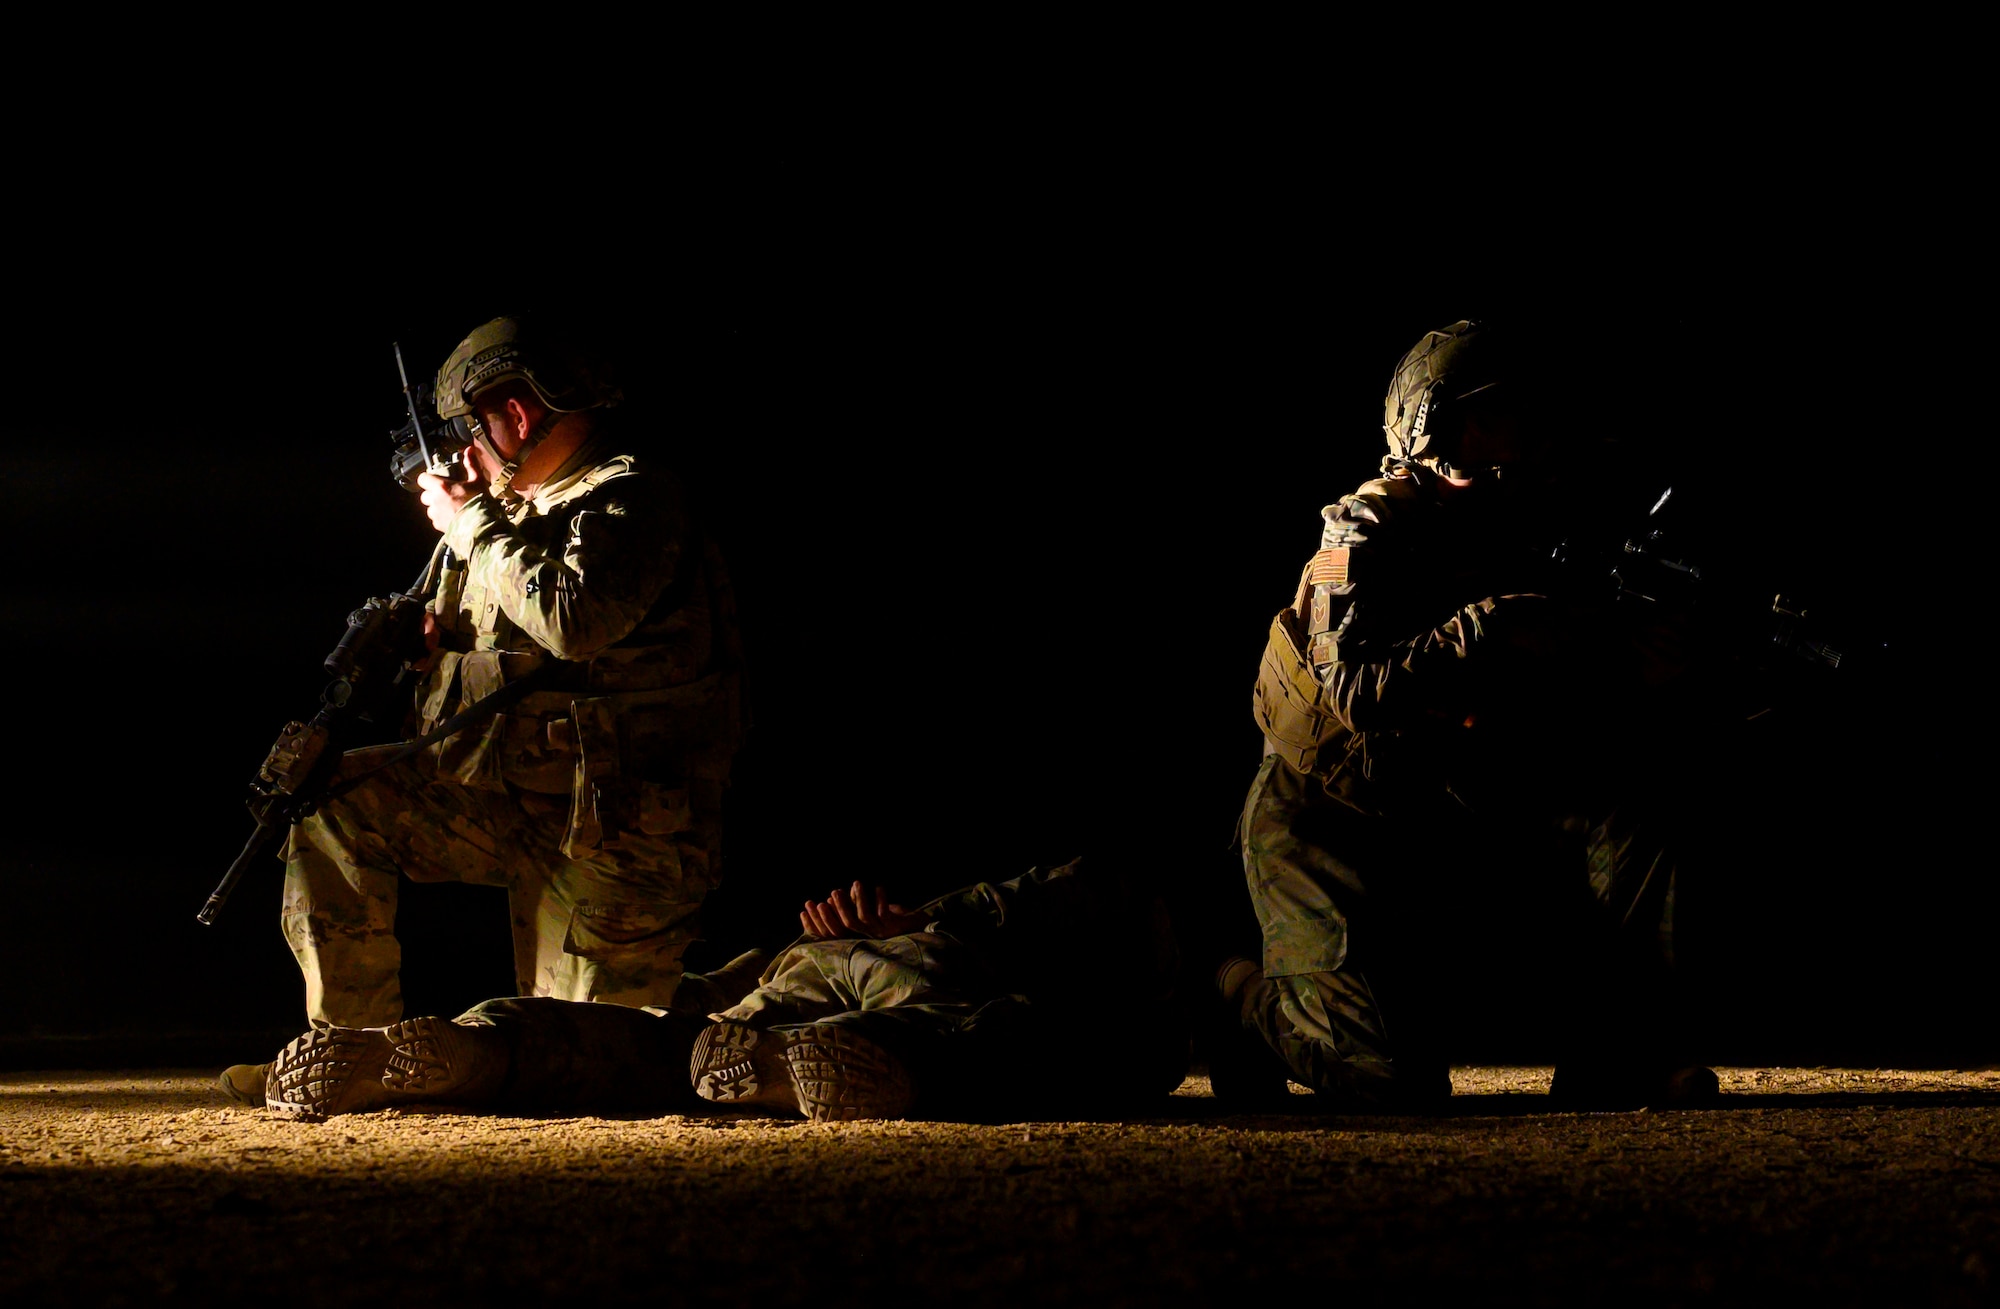 U.S. Air Force defenders with the 378th Expeditionary Security Forces Squadron guard a simulated subdued enemy participant a quick response training event in blackout conditions at Prince Sultan Air Base, Kingdom of Saudi Arabia, June 12, 2021. PSAB Explosive Ordnance Disposal, Security Forces and Medical personnel participated in integrated training to bolster defensive capabilities and maintain readiness at all times. (U.S. Air Force Photo by Senior Airman Samuel Earick)